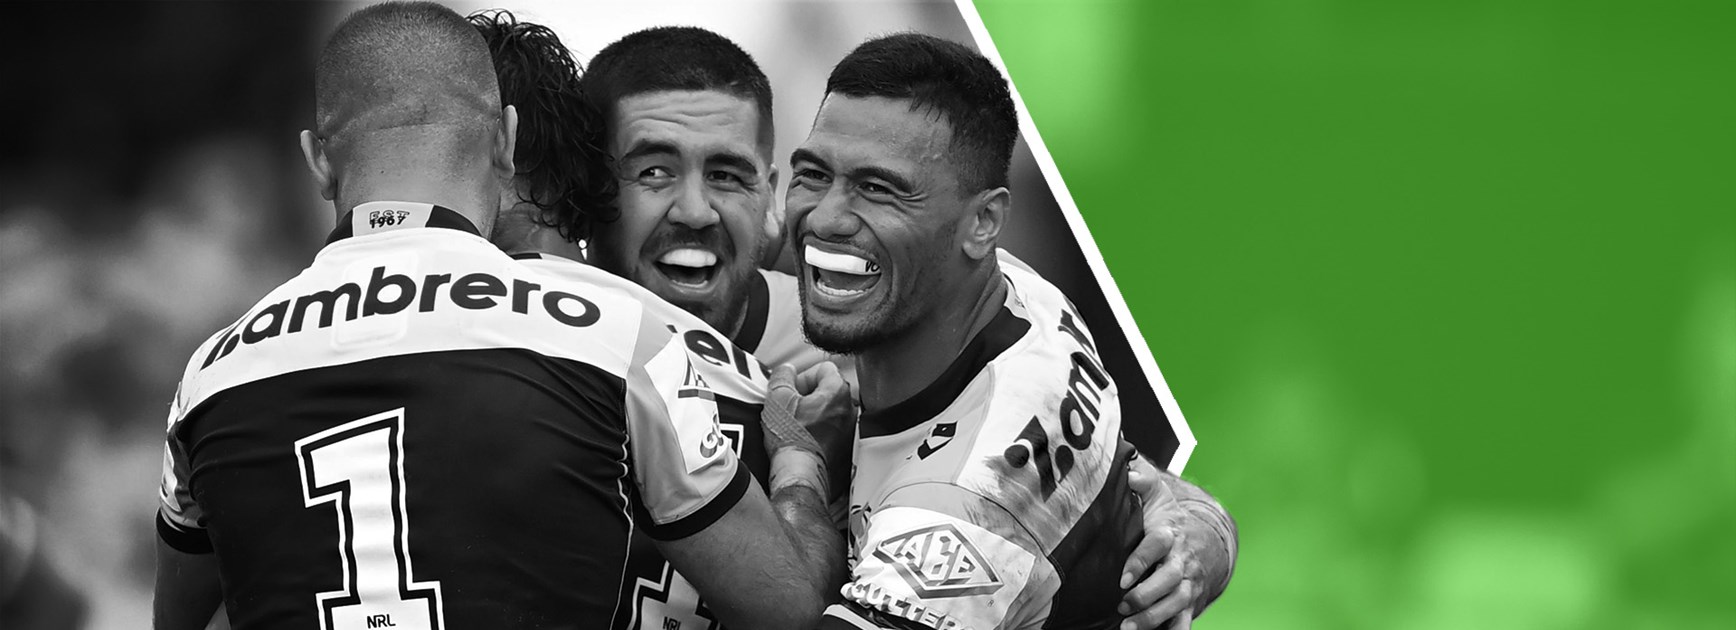 NRL Tipping: Expert tips for Round 6